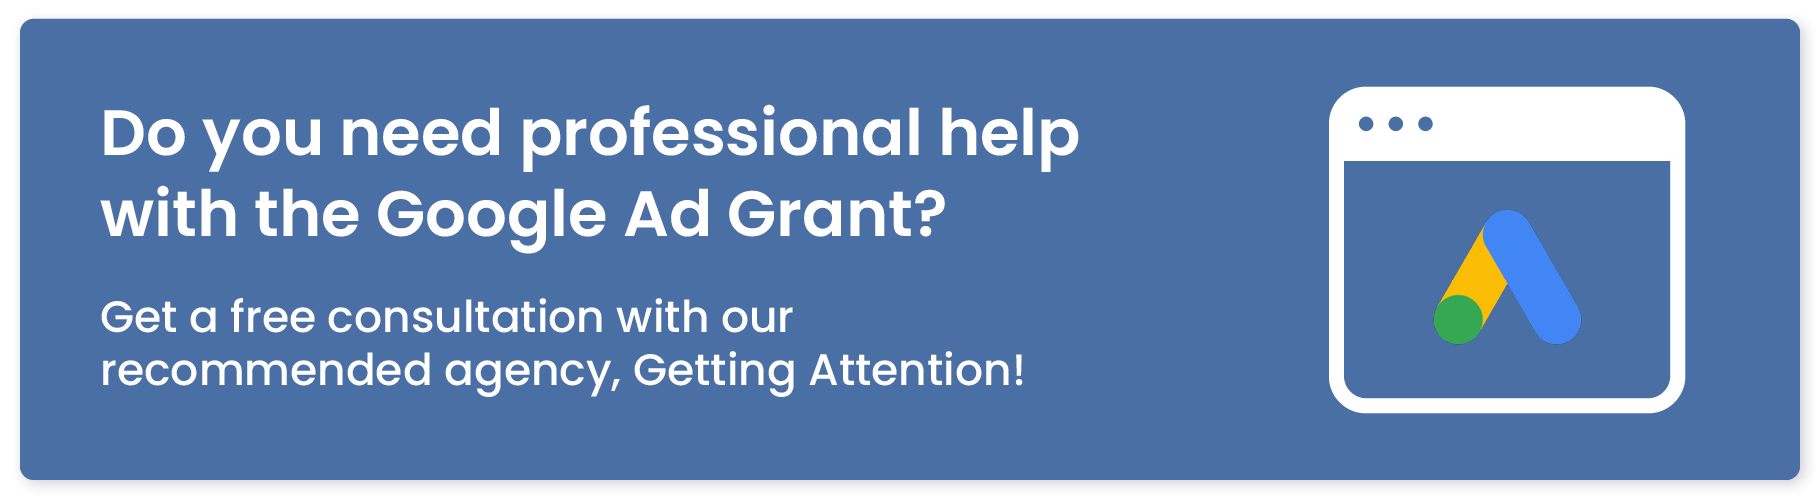 Do you need professional help with the Google Ad Grant? Get a free consultation with our recommended agency, Getting Attention!